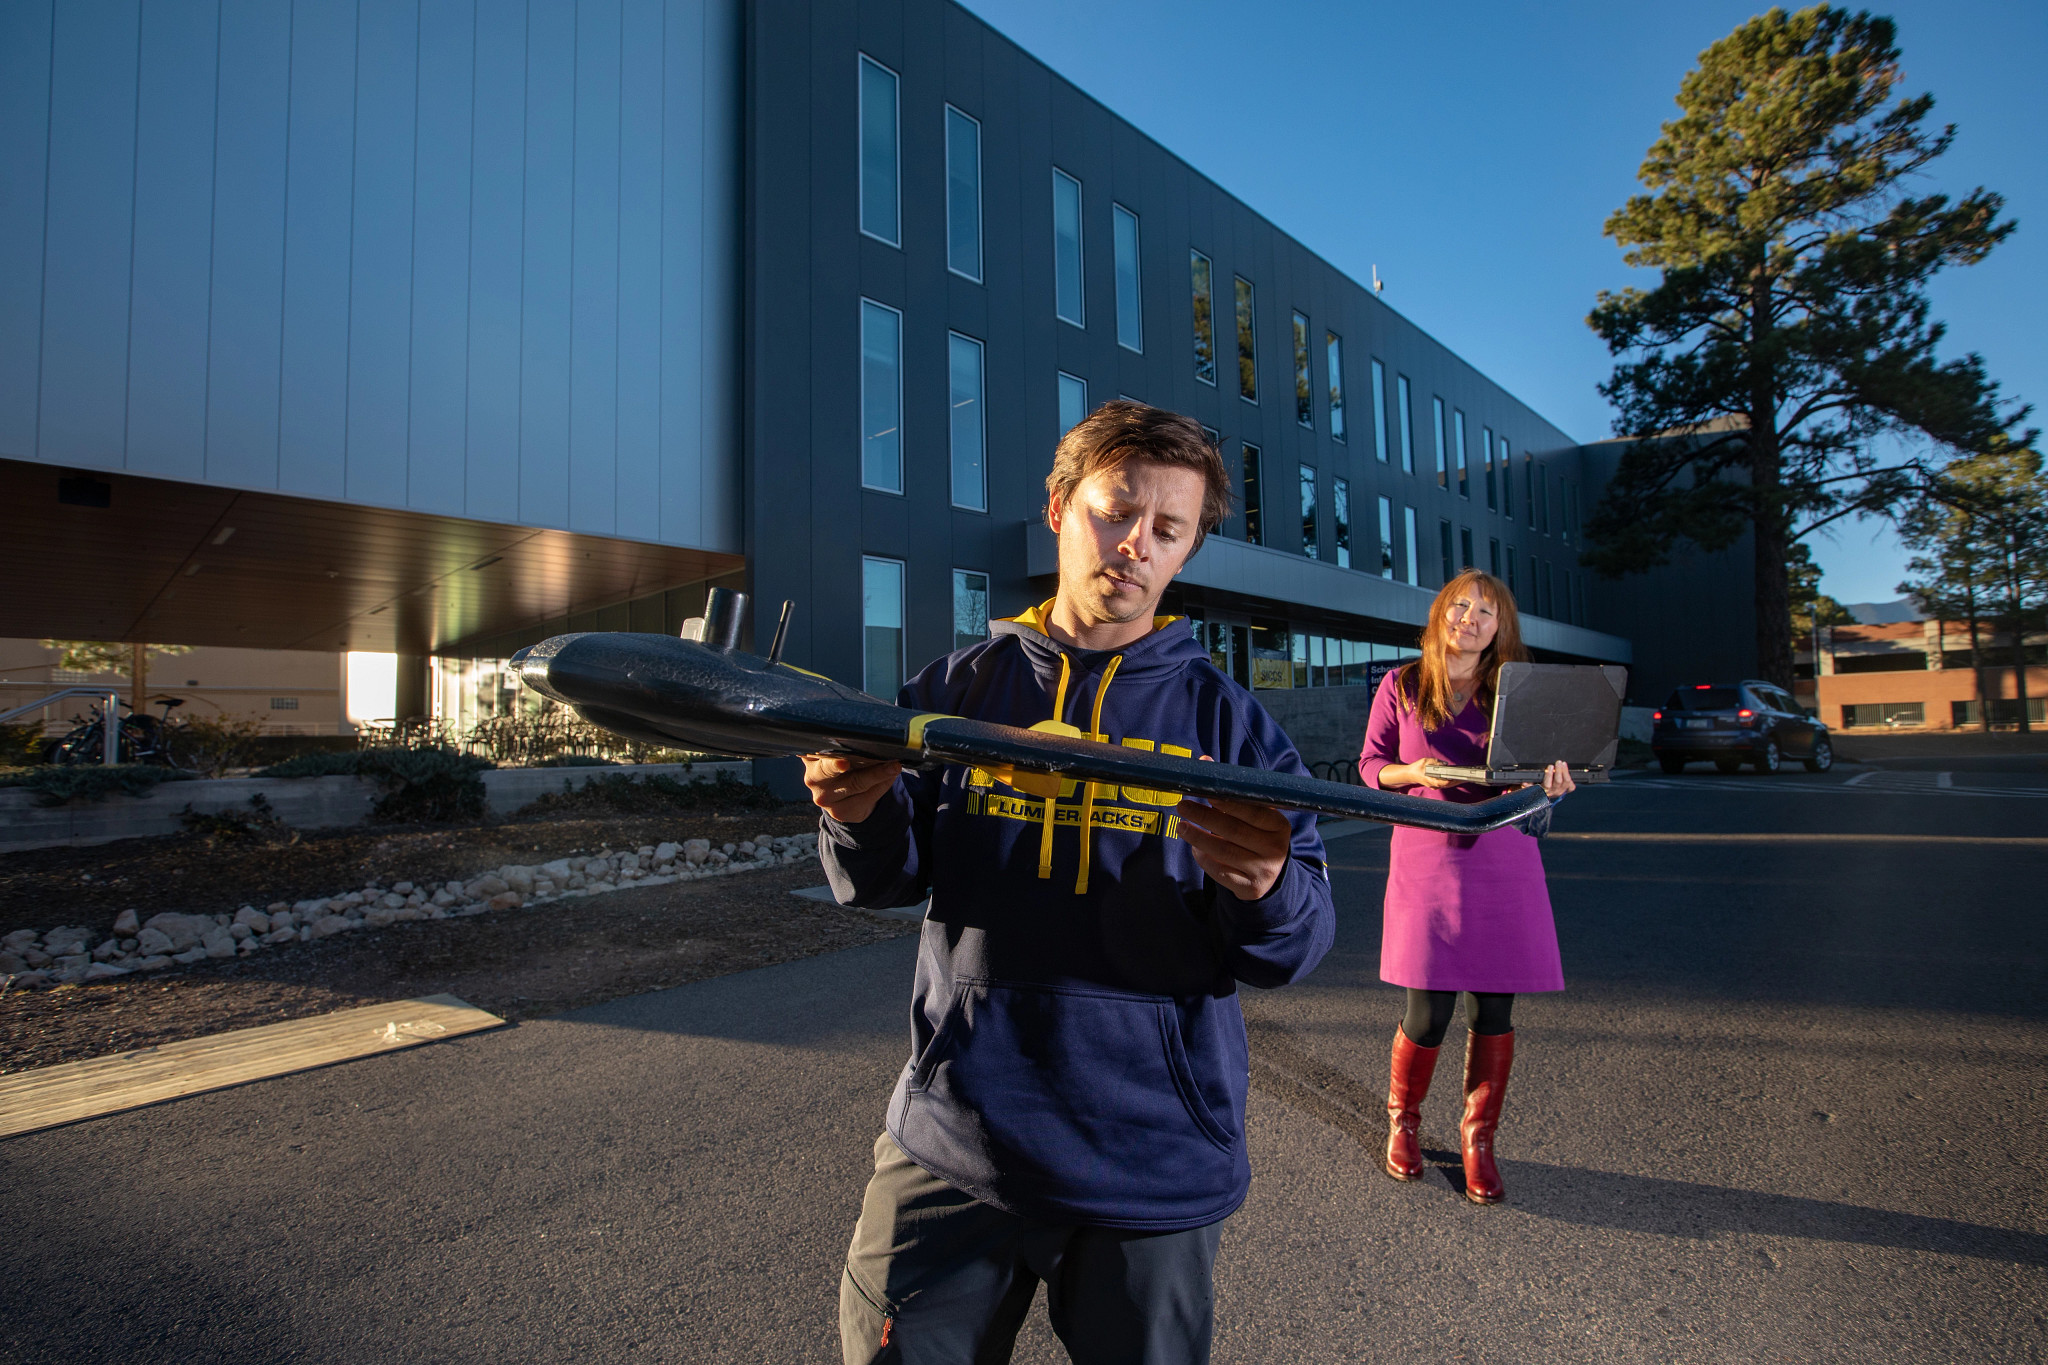 Professor and student preparing to launch a remote-controlled plane outside.